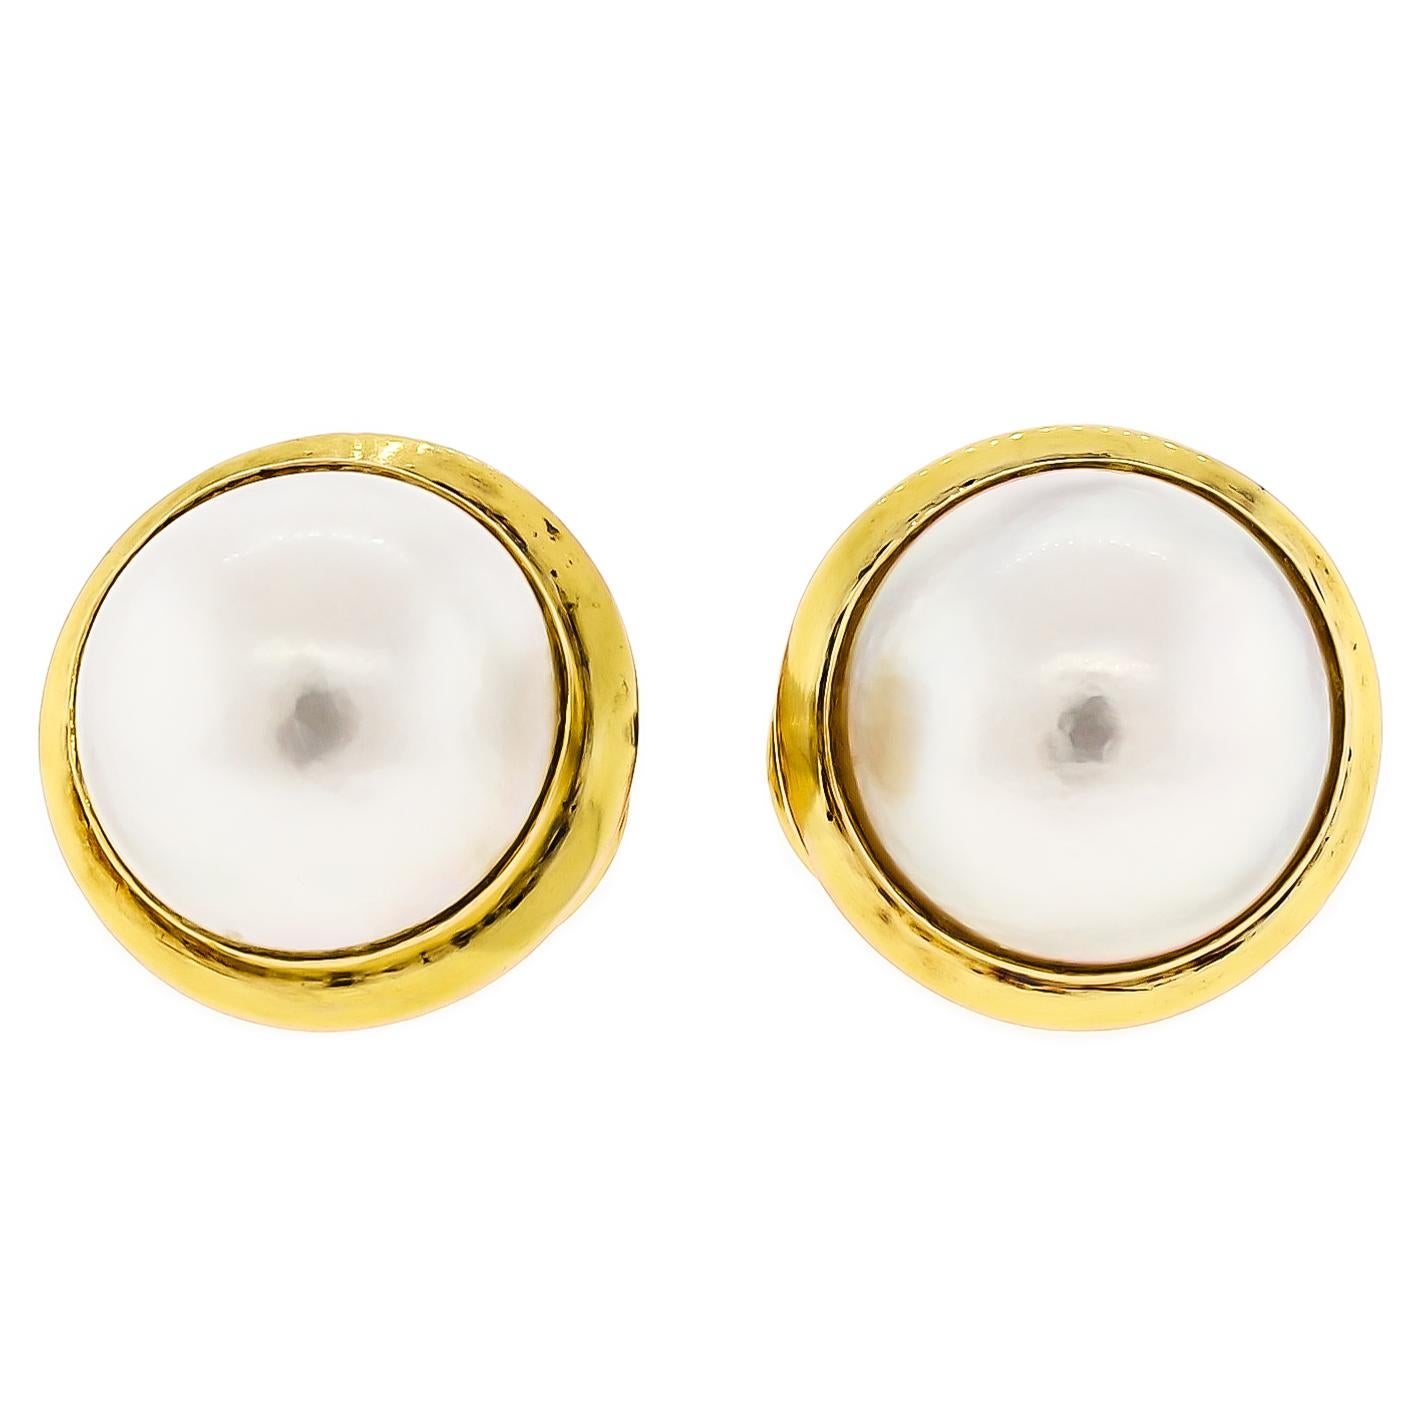 Exquisite Vintage Large Mabé Pearl and Earring Suite, 14 Karat Yellow Gold For Sale 2